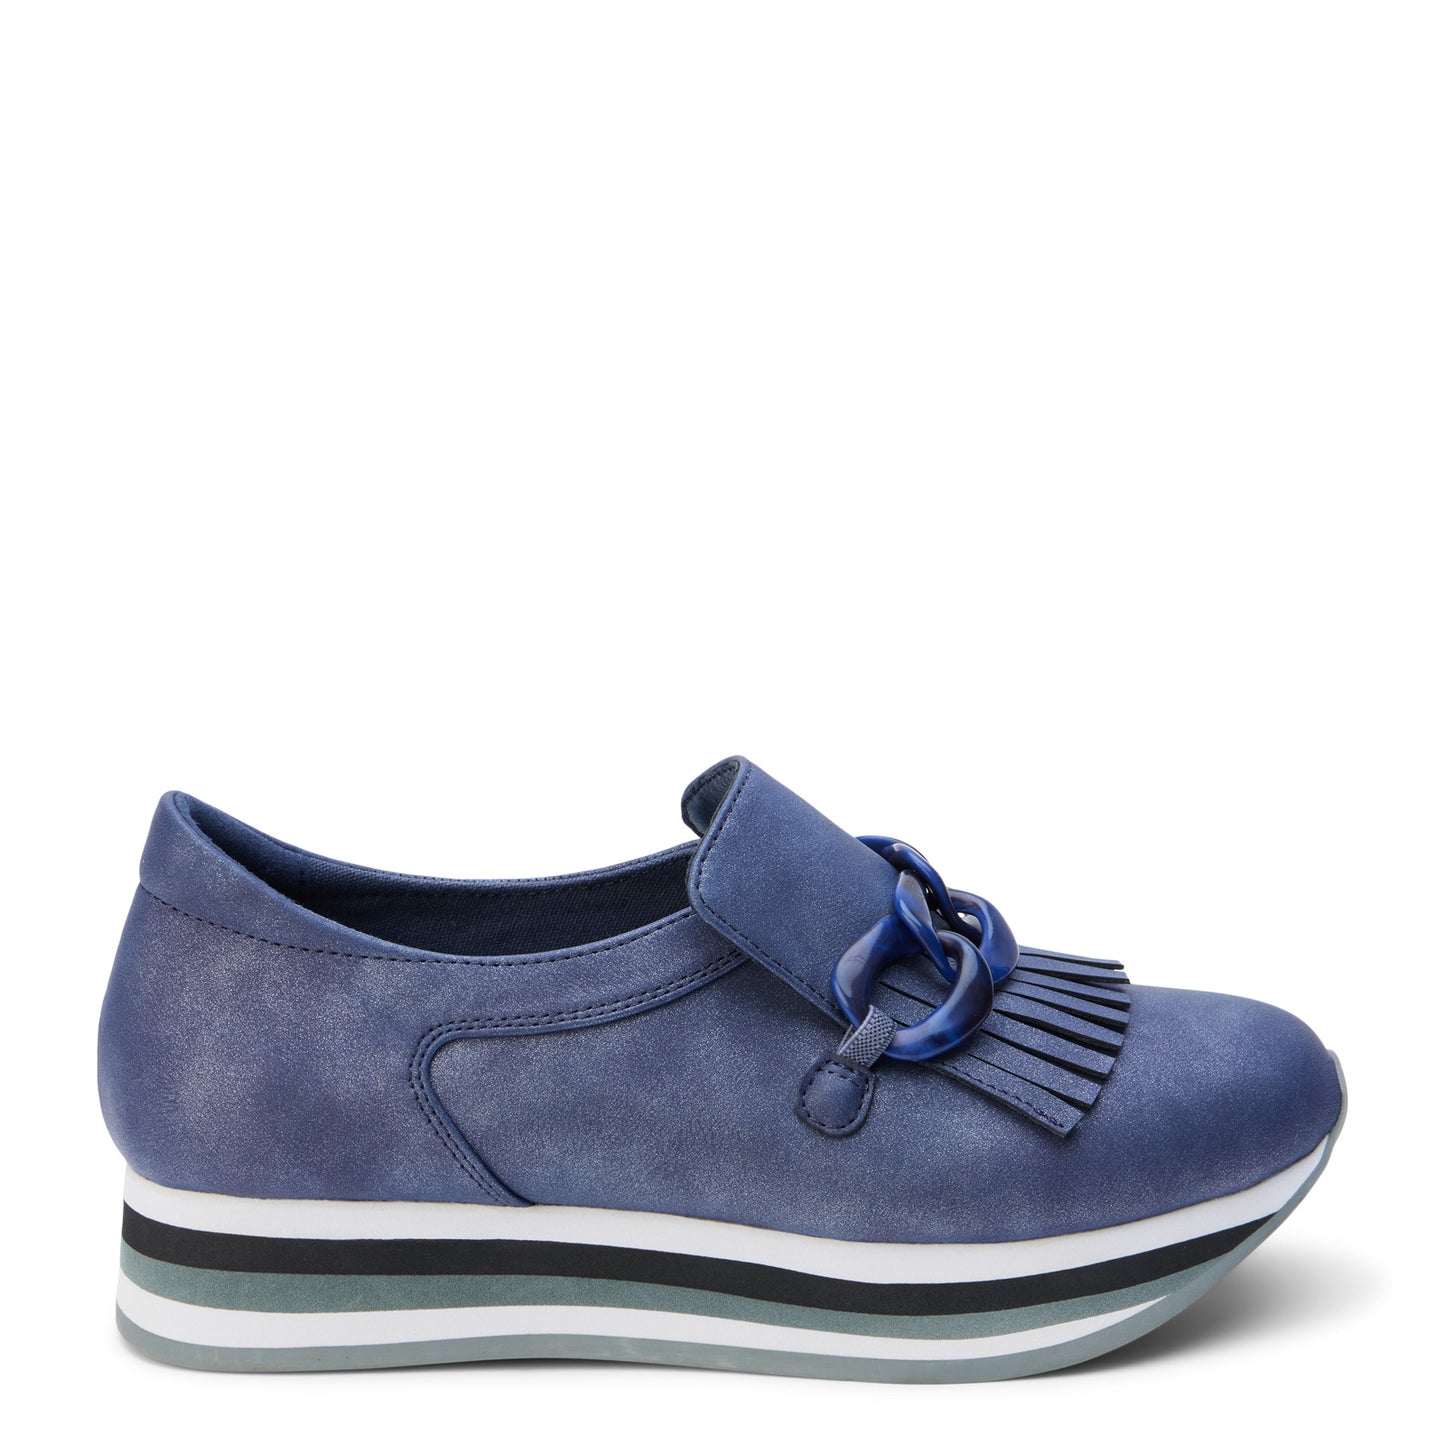 Peltz Shoes  Women's Coconuts by Matisse Bess Loafer NAVY FROST BESS NAVY FROST